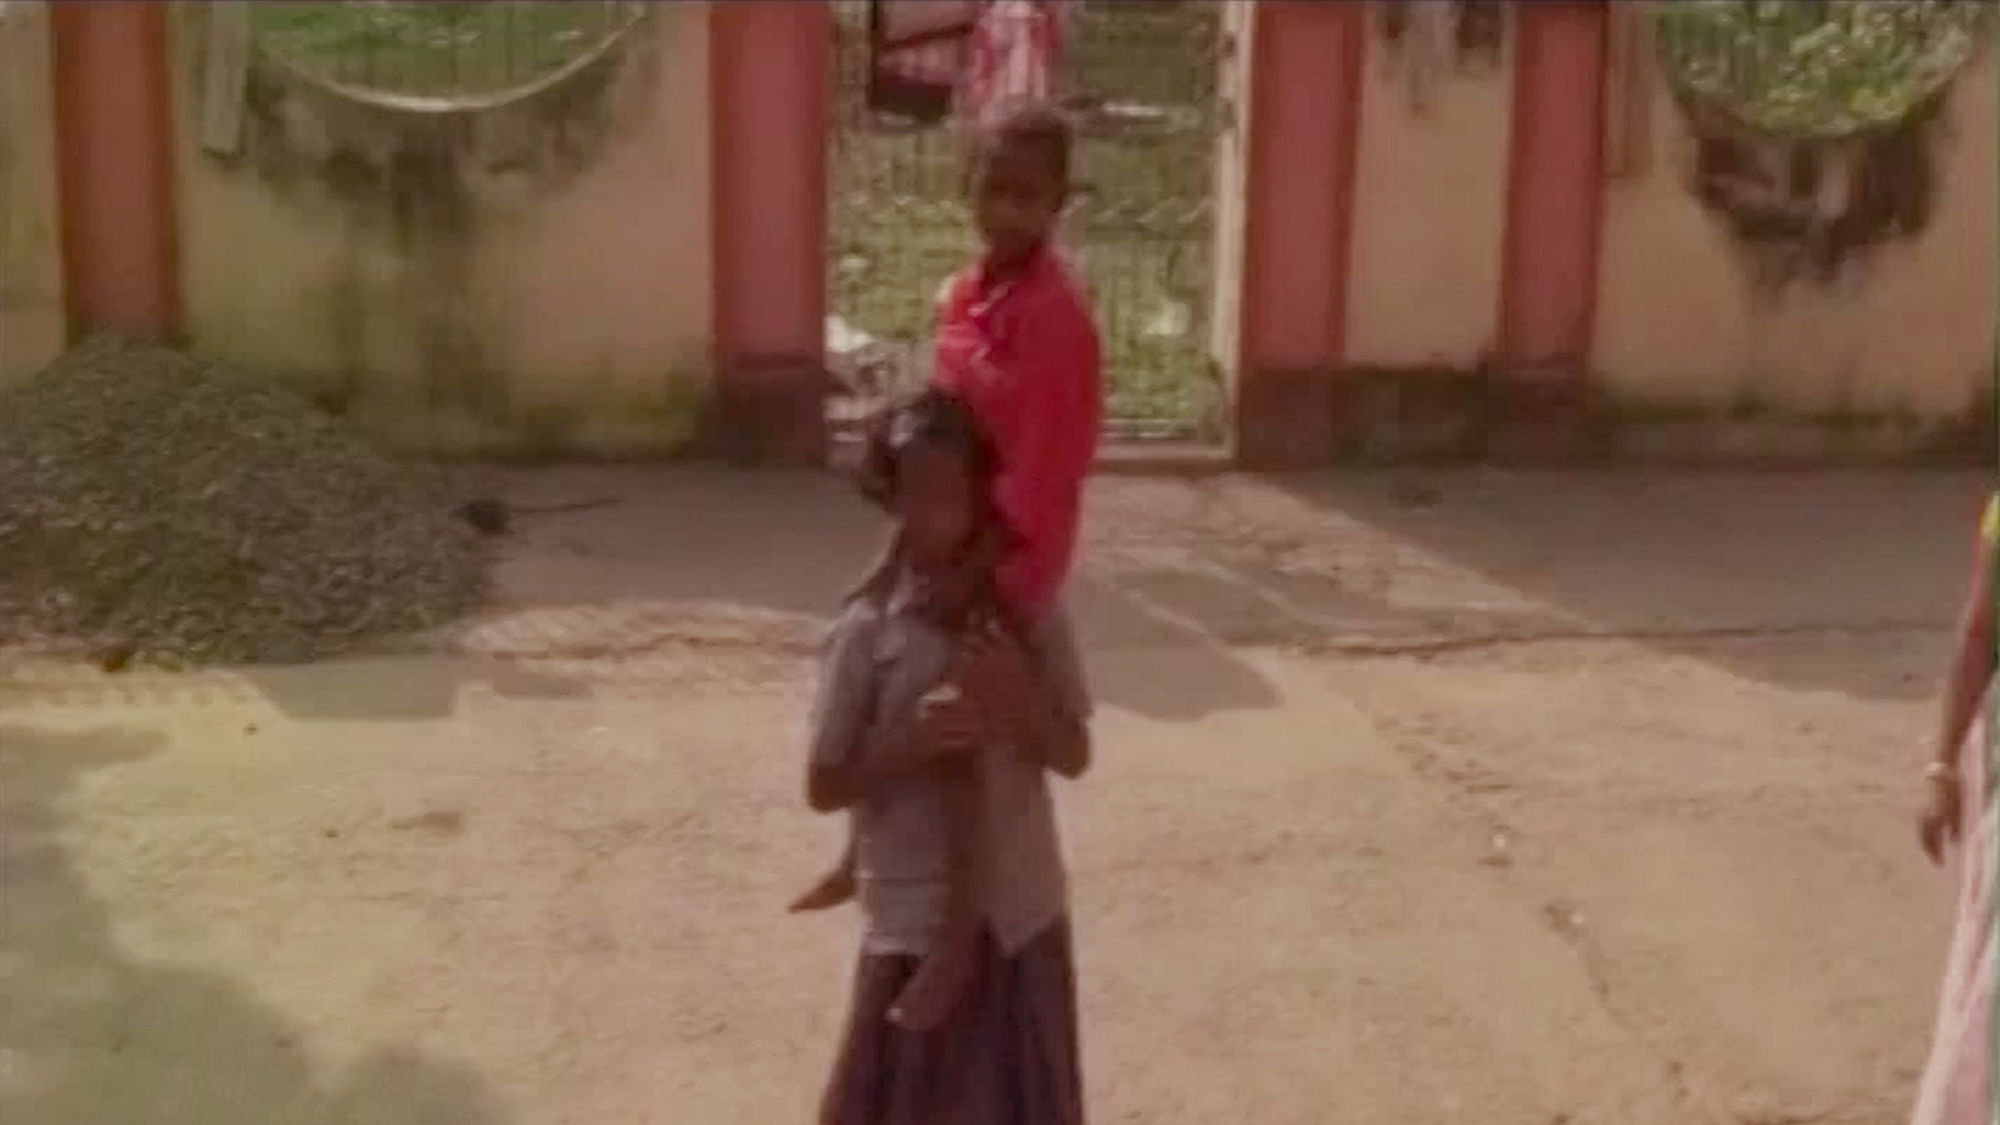 Malti Tudu, who is just 11 years old carries her younger brother on her shoulders in Godda, Jharkhand. (Photo: ANI screengrab)